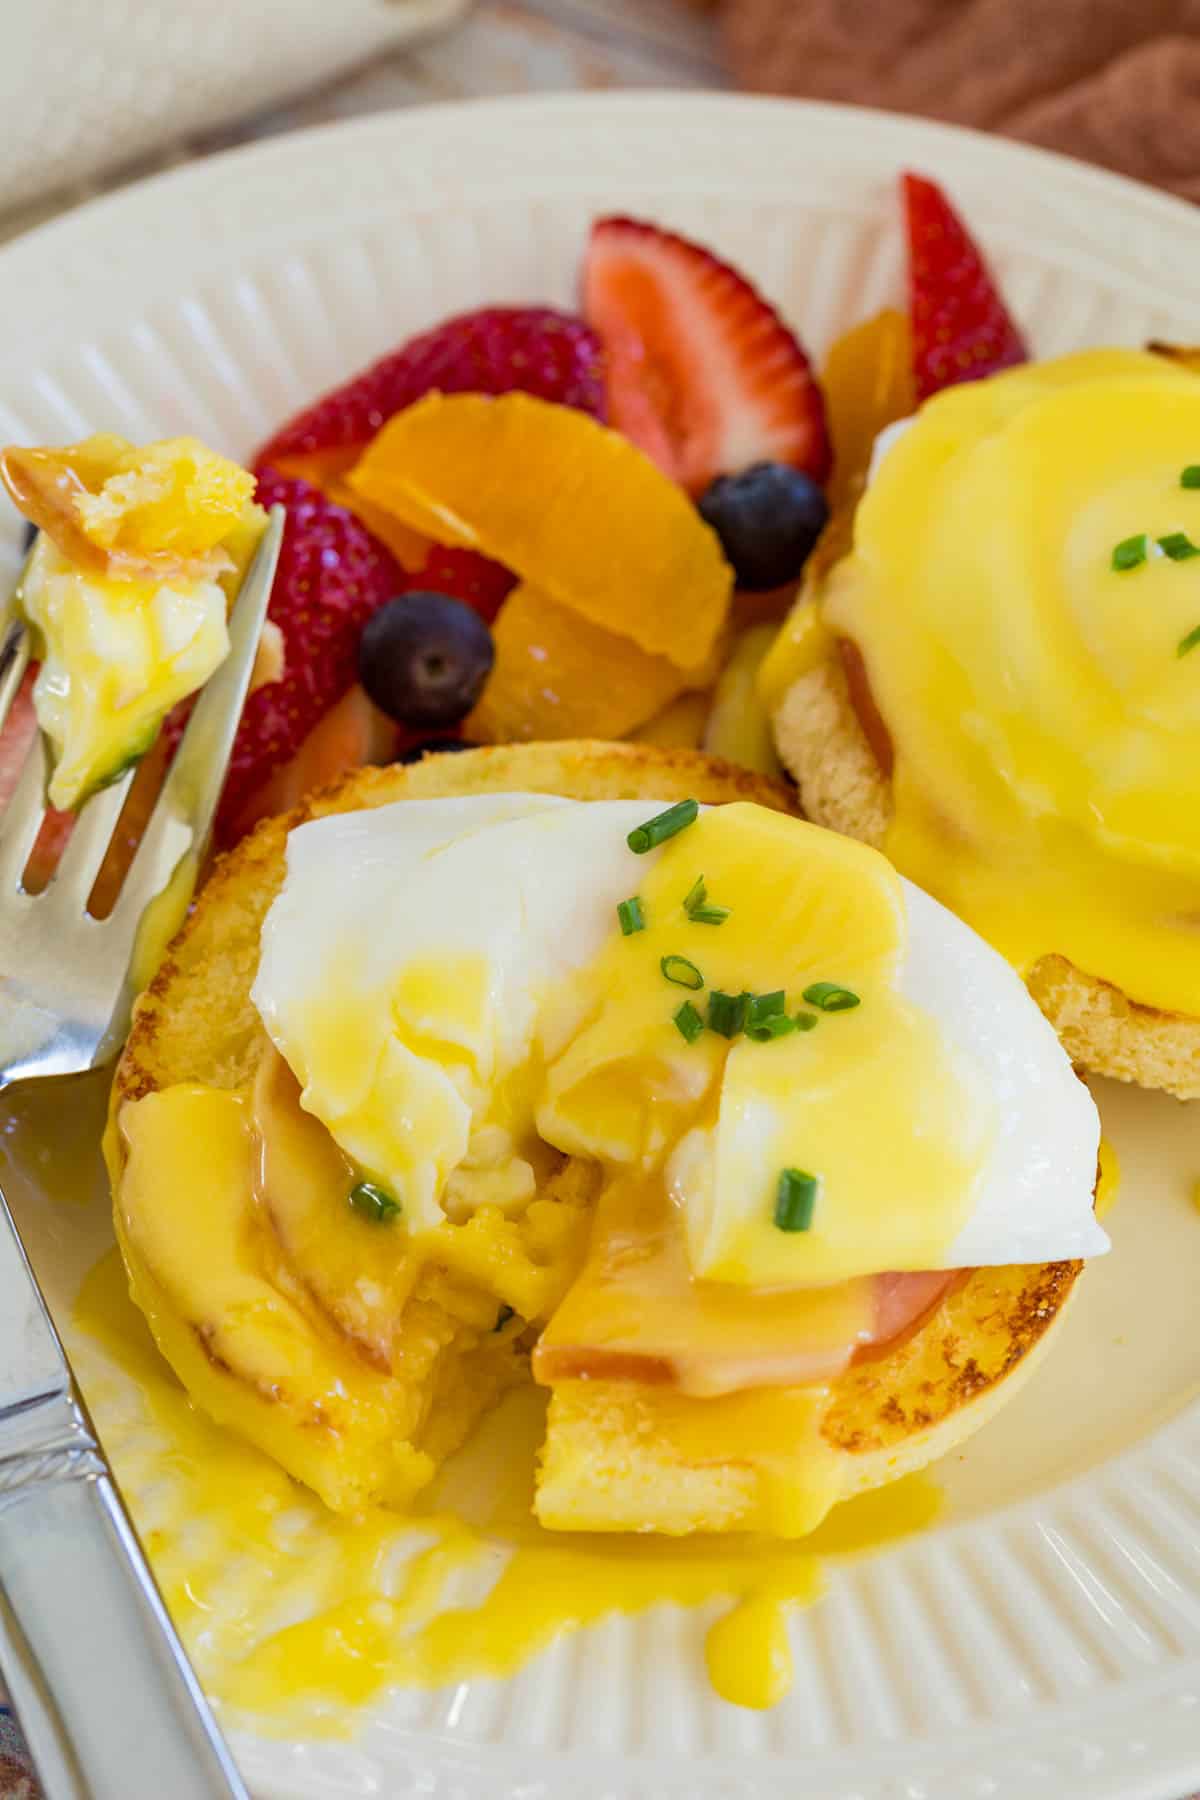 An Eggs Benedict stack that's been cut in half with a fork, with the egg yolk running, surrounded by fresh fruit.